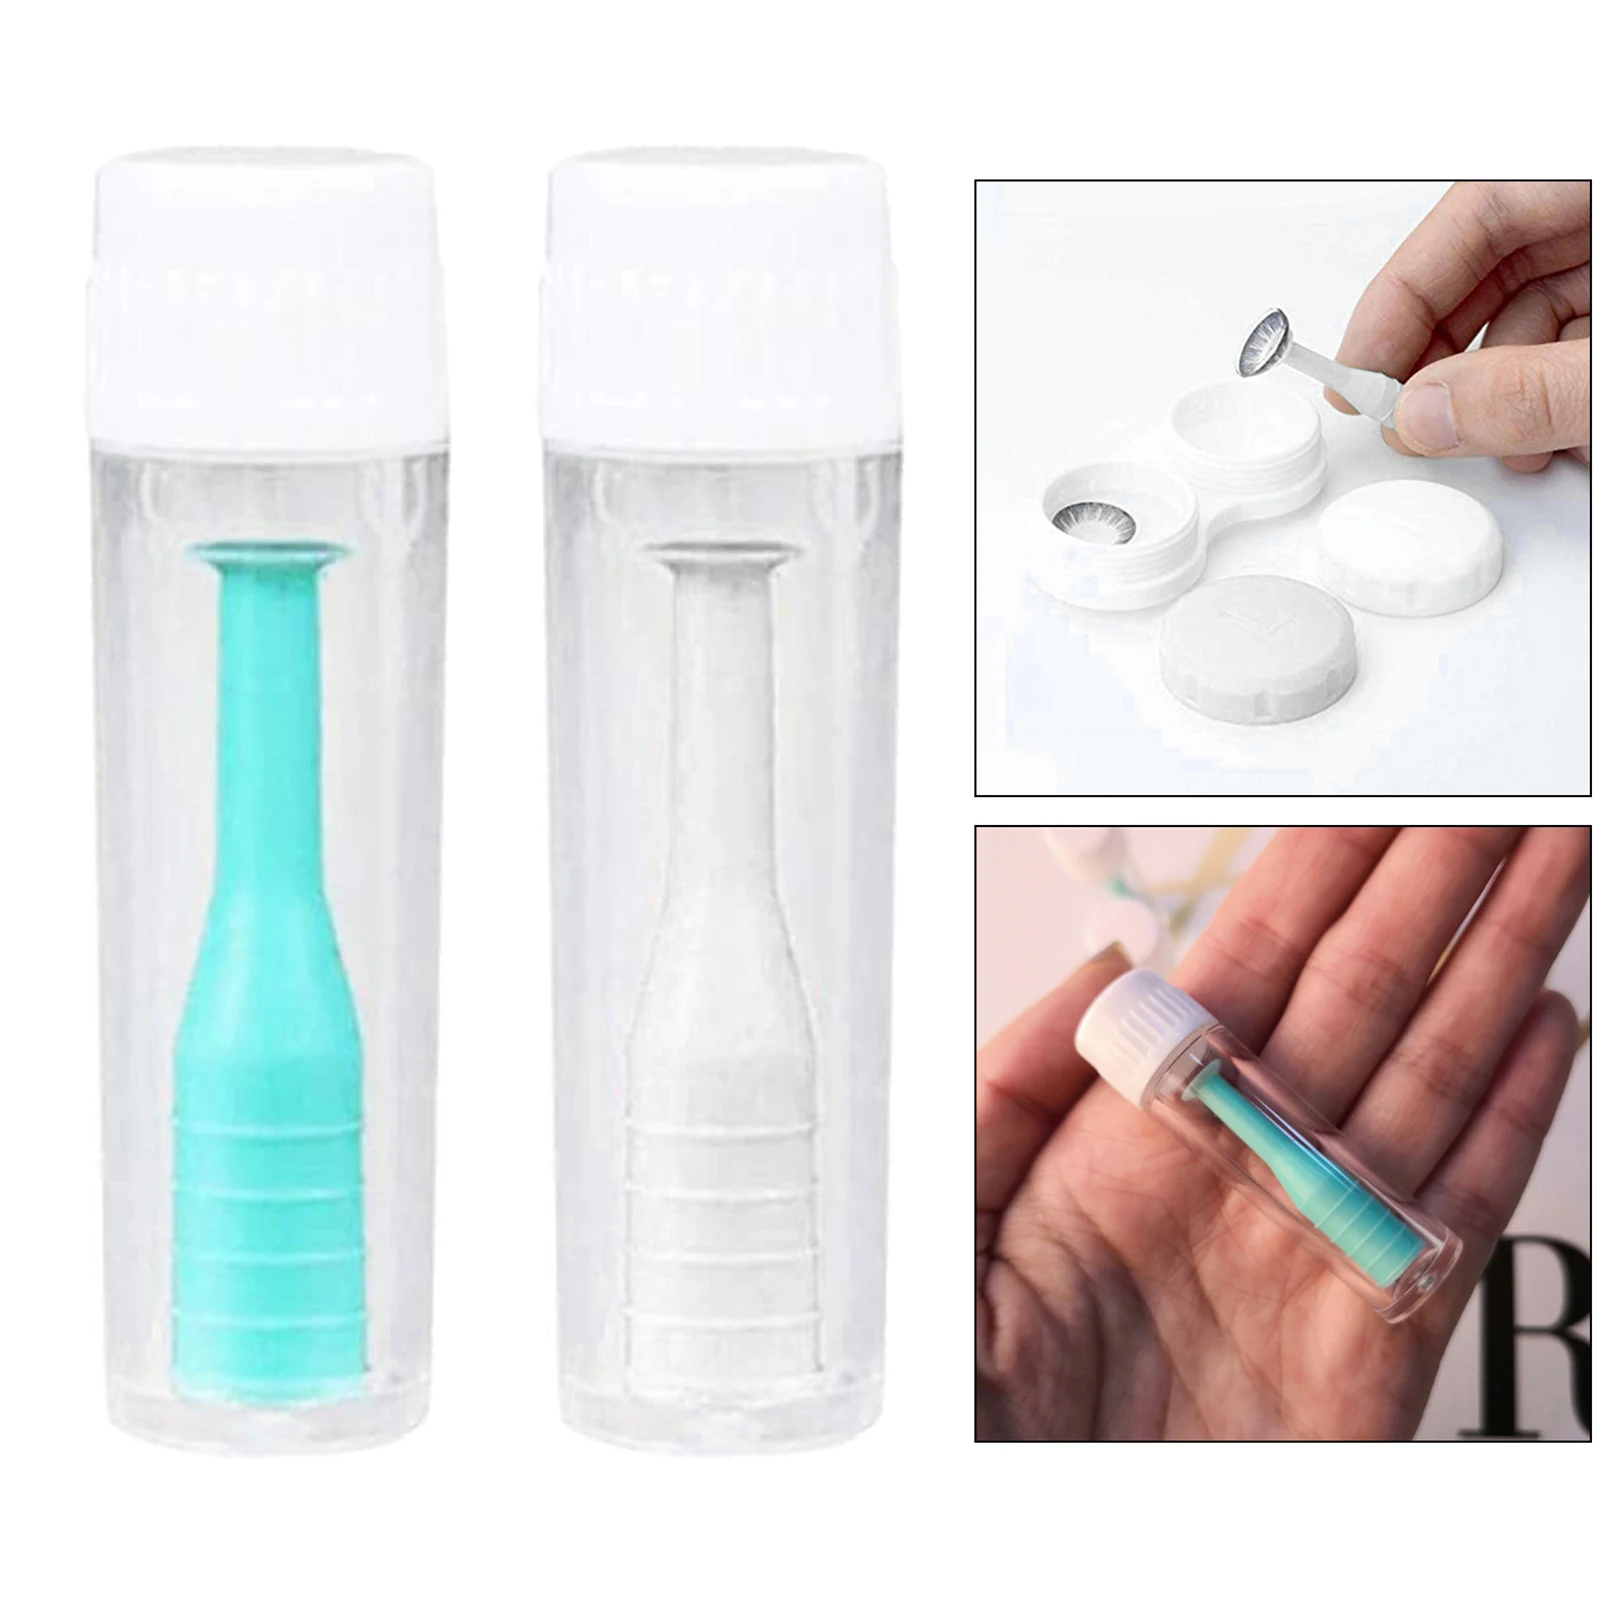 Soft Contact Lens Remover Inserter Plunger Extractor Applicator for Soft Hard Lenses